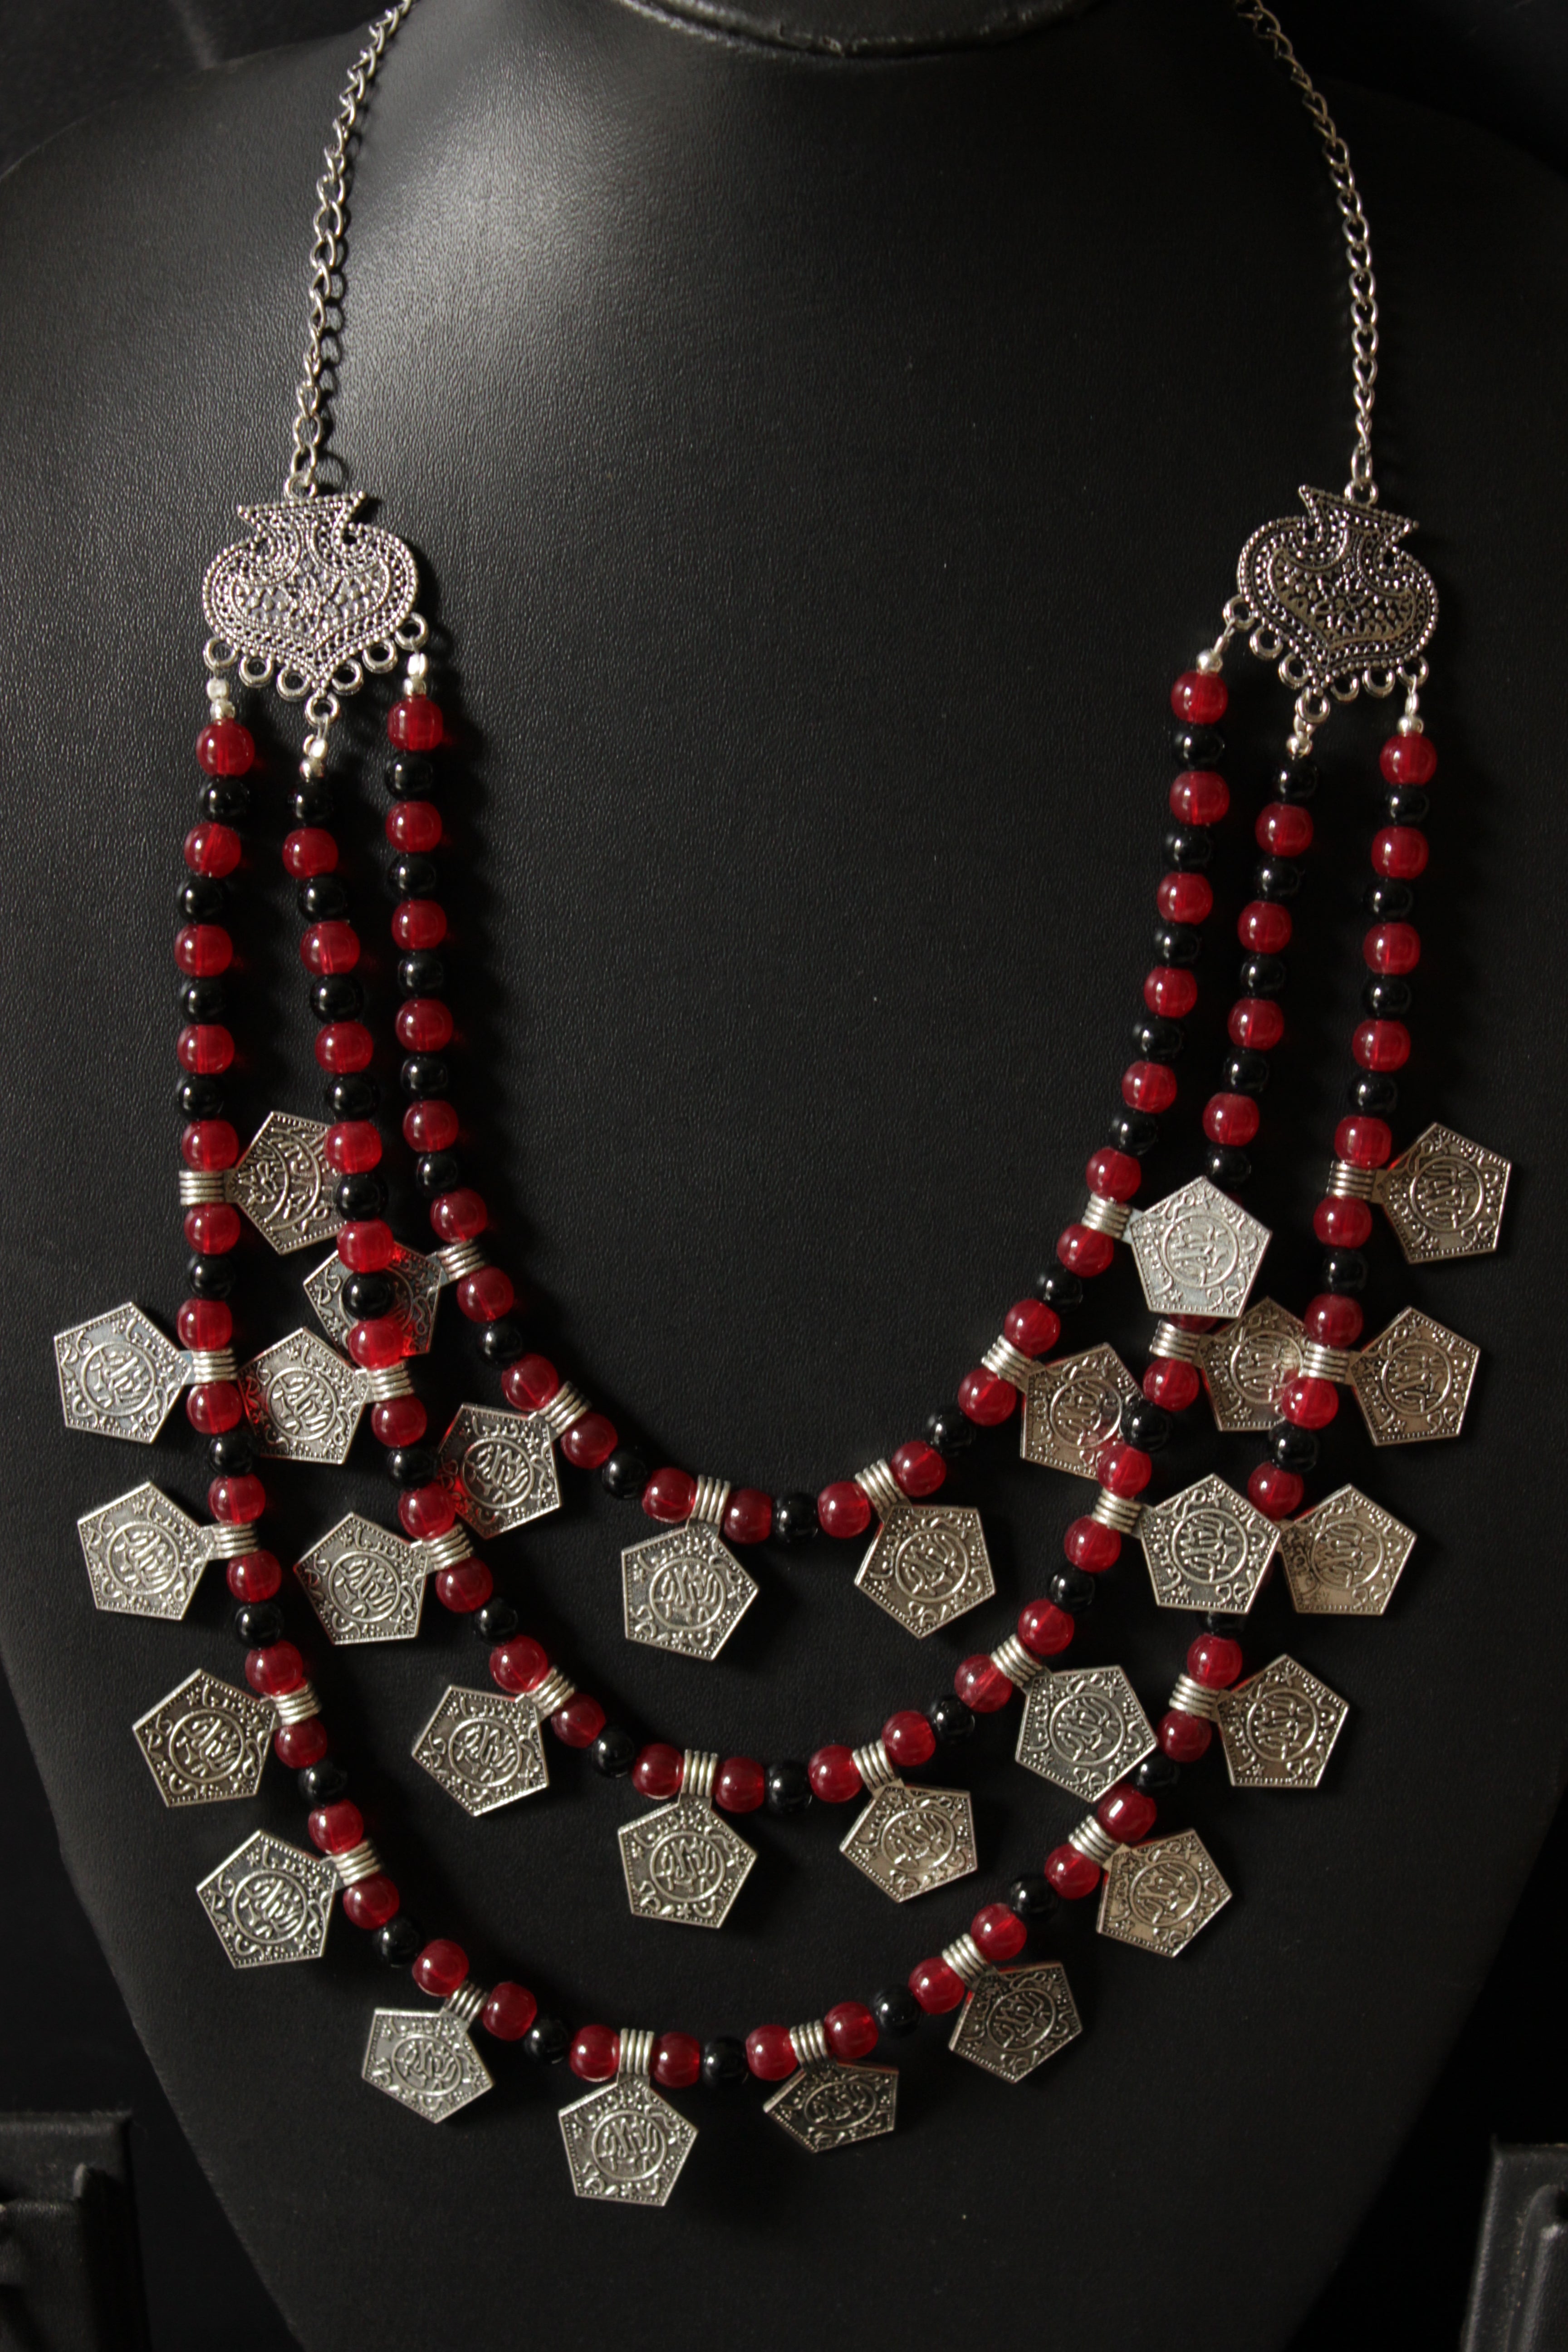 Afghani Glass Beads Stamped Coins Necklace Set with Black & Red Glass Beads